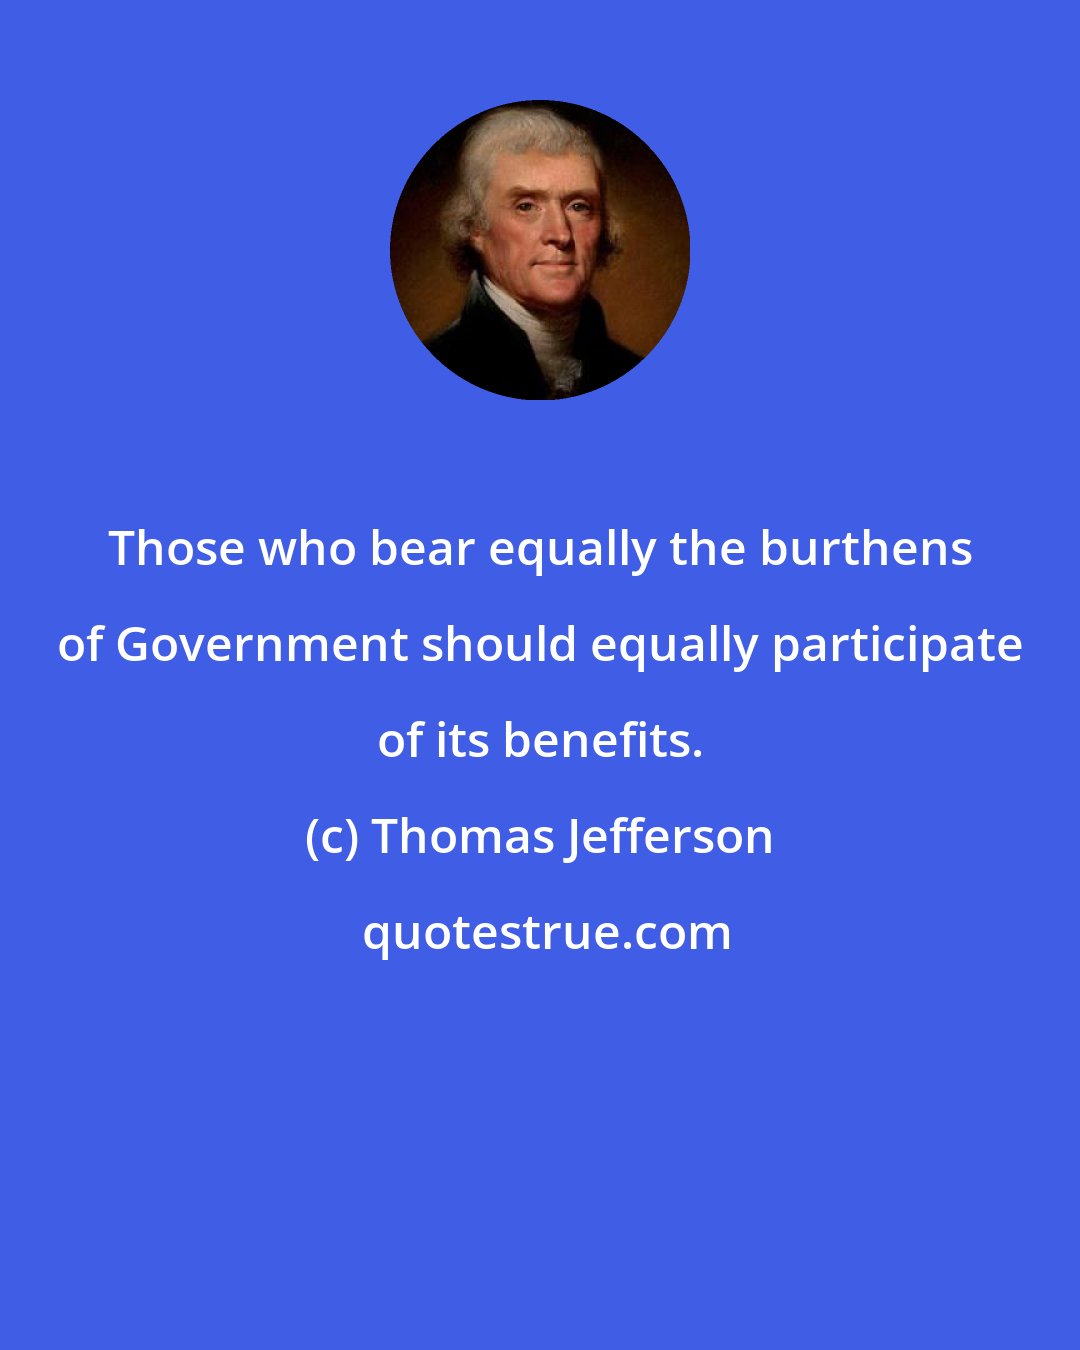 Thomas Jefferson: Those who bear equally the burthens of Government should equally participate of its benefits.